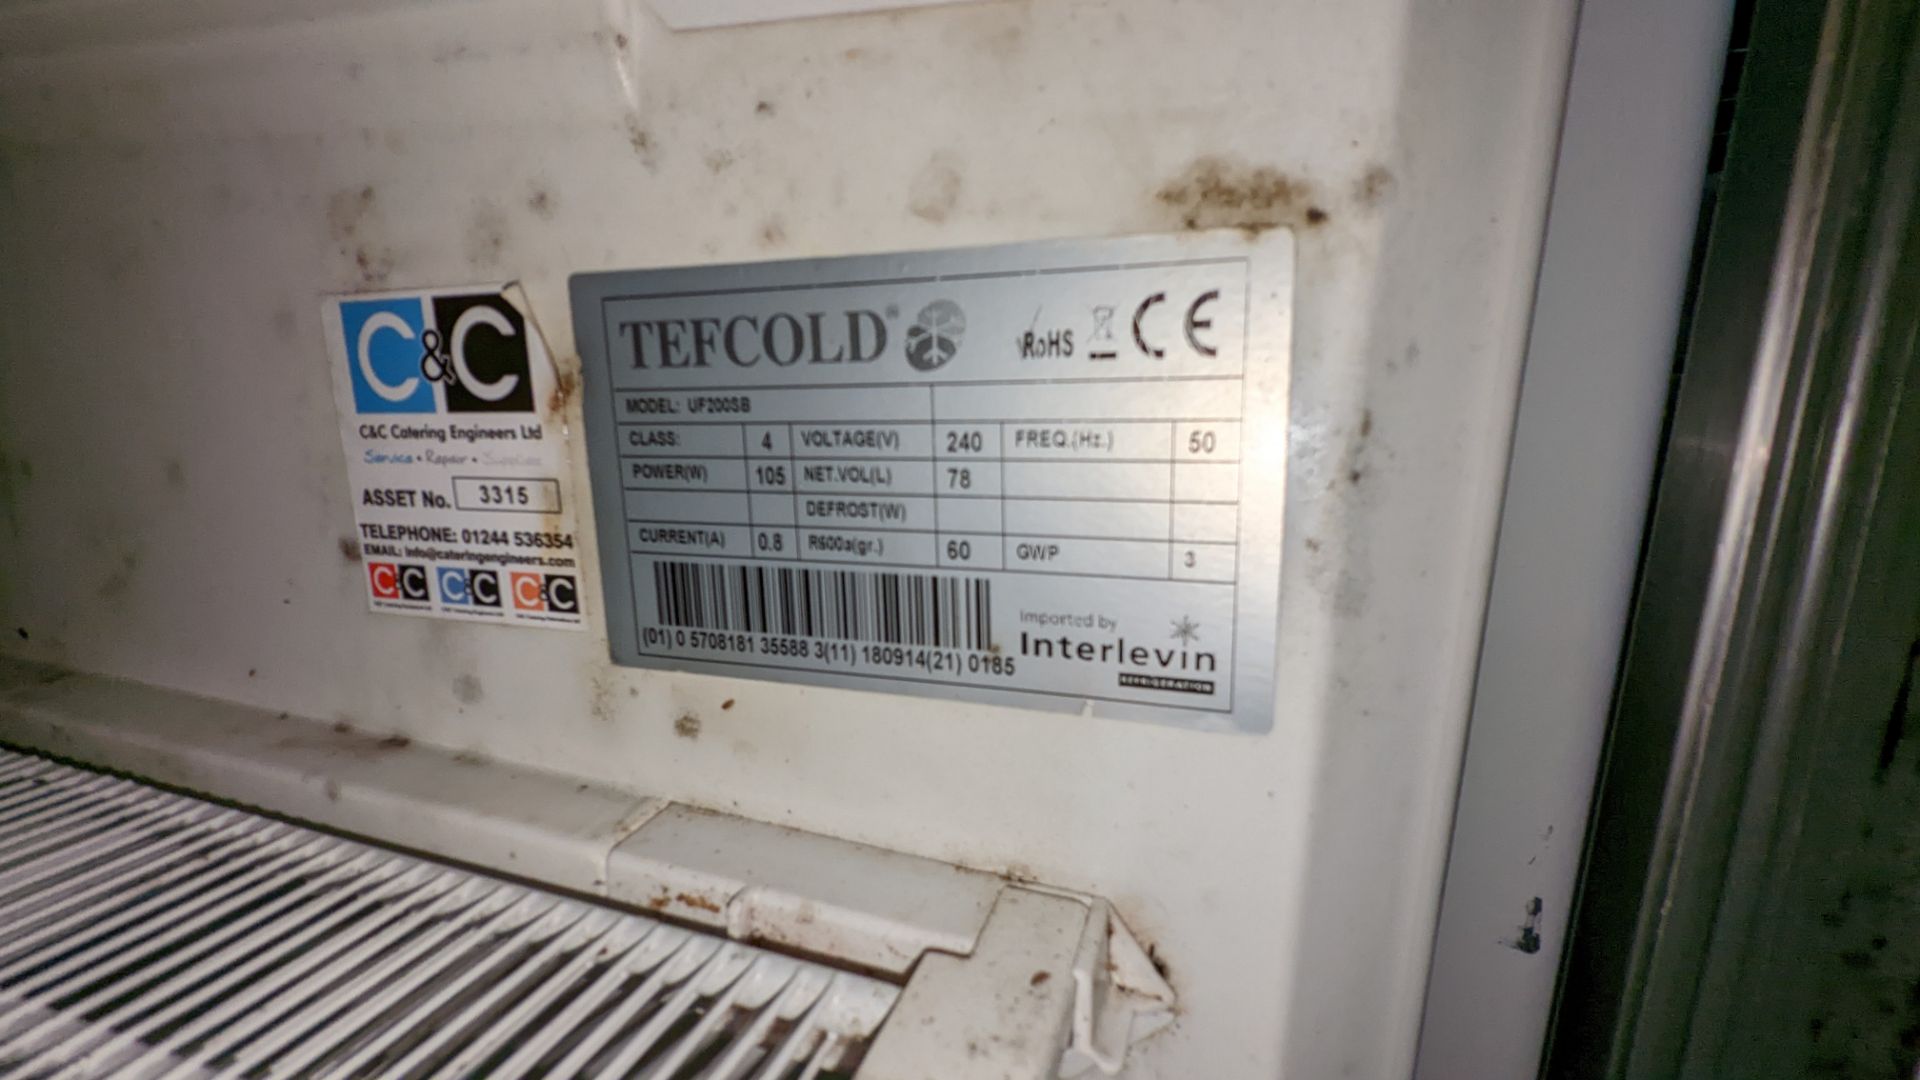 Tefcold stainless steel undercounter freezer - Image 5 of 5